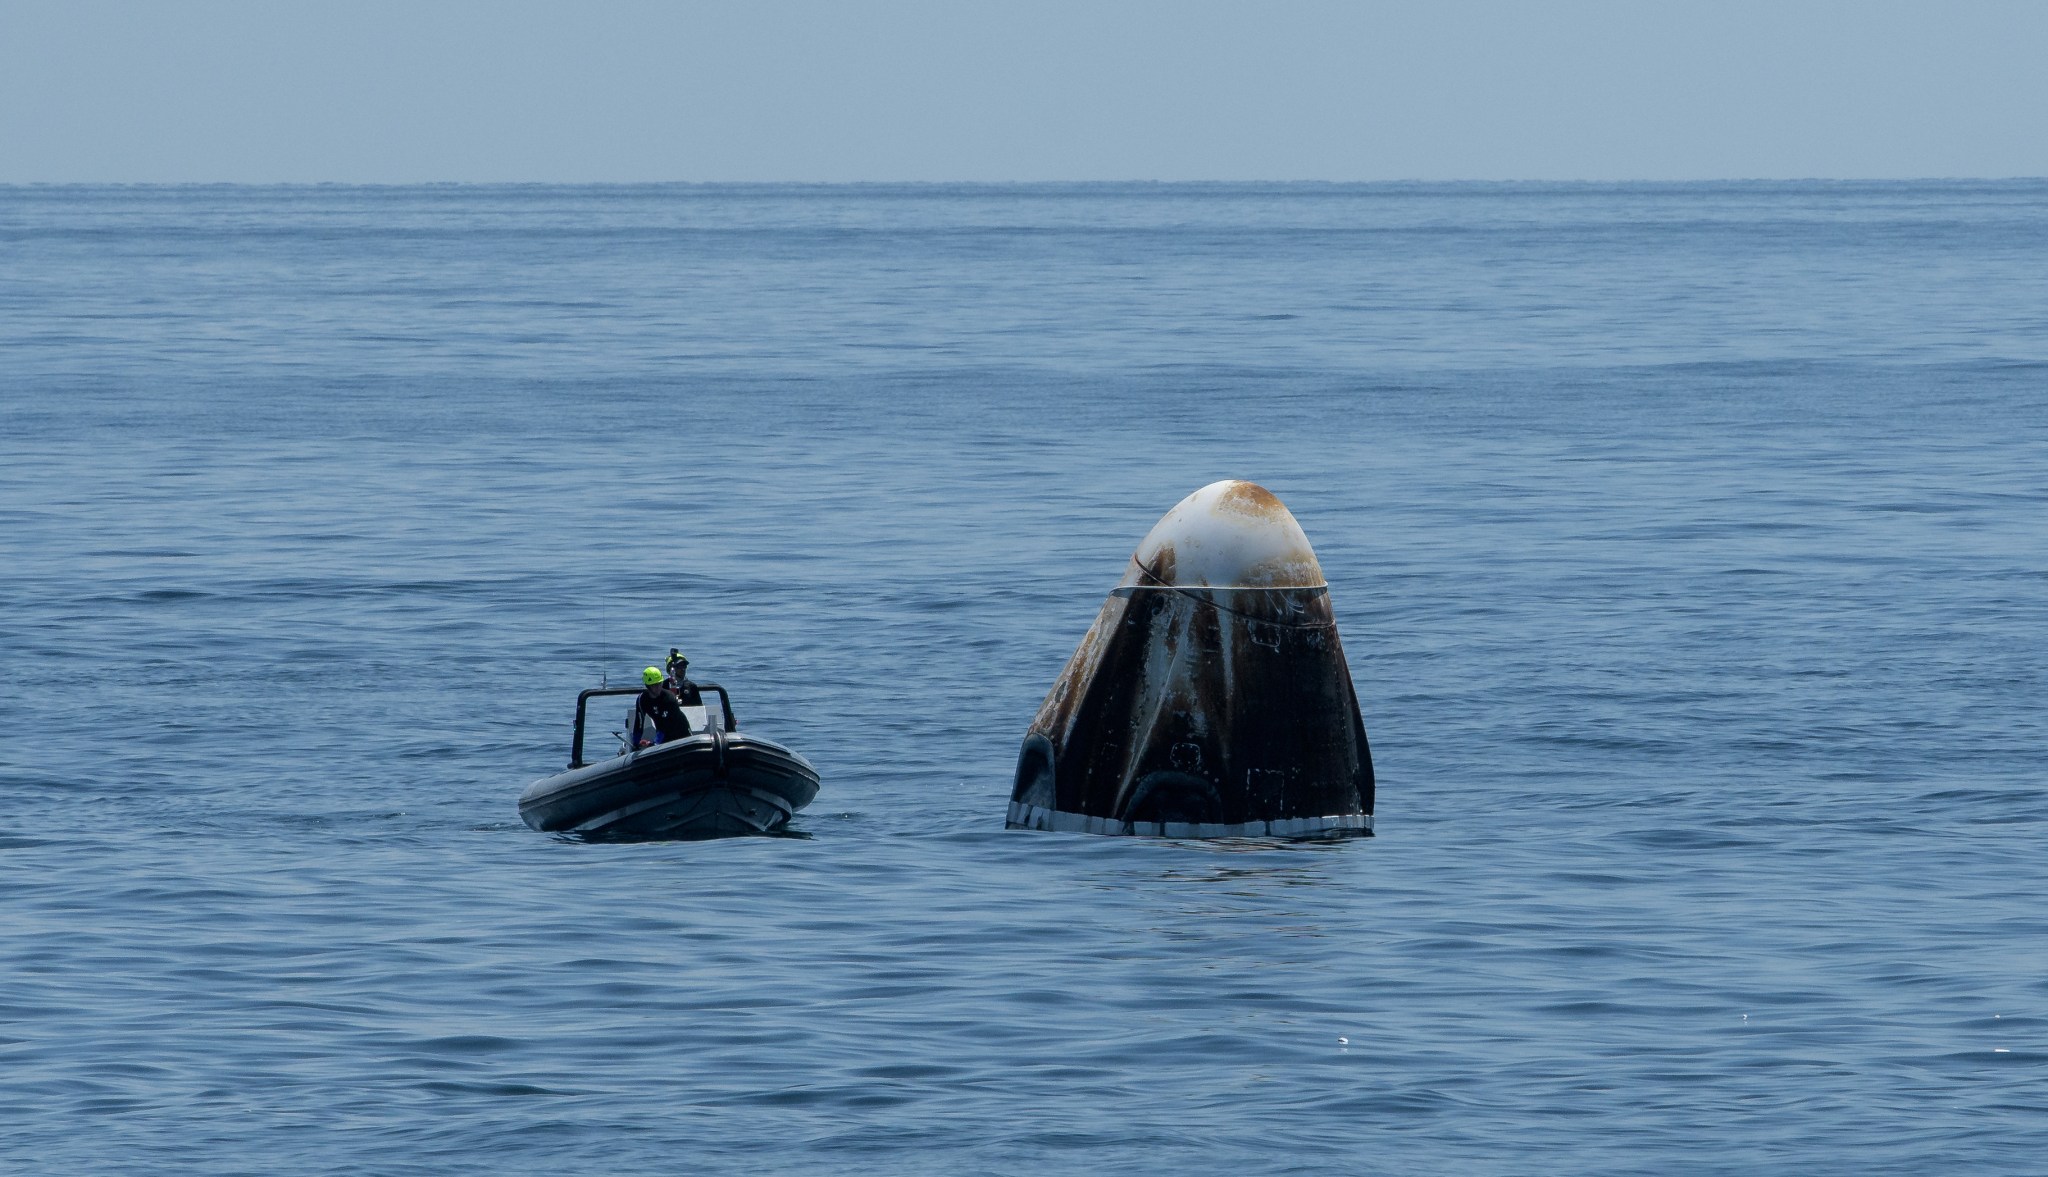 Support teams retrieve the SpaceX Crew Dragon Endeavour